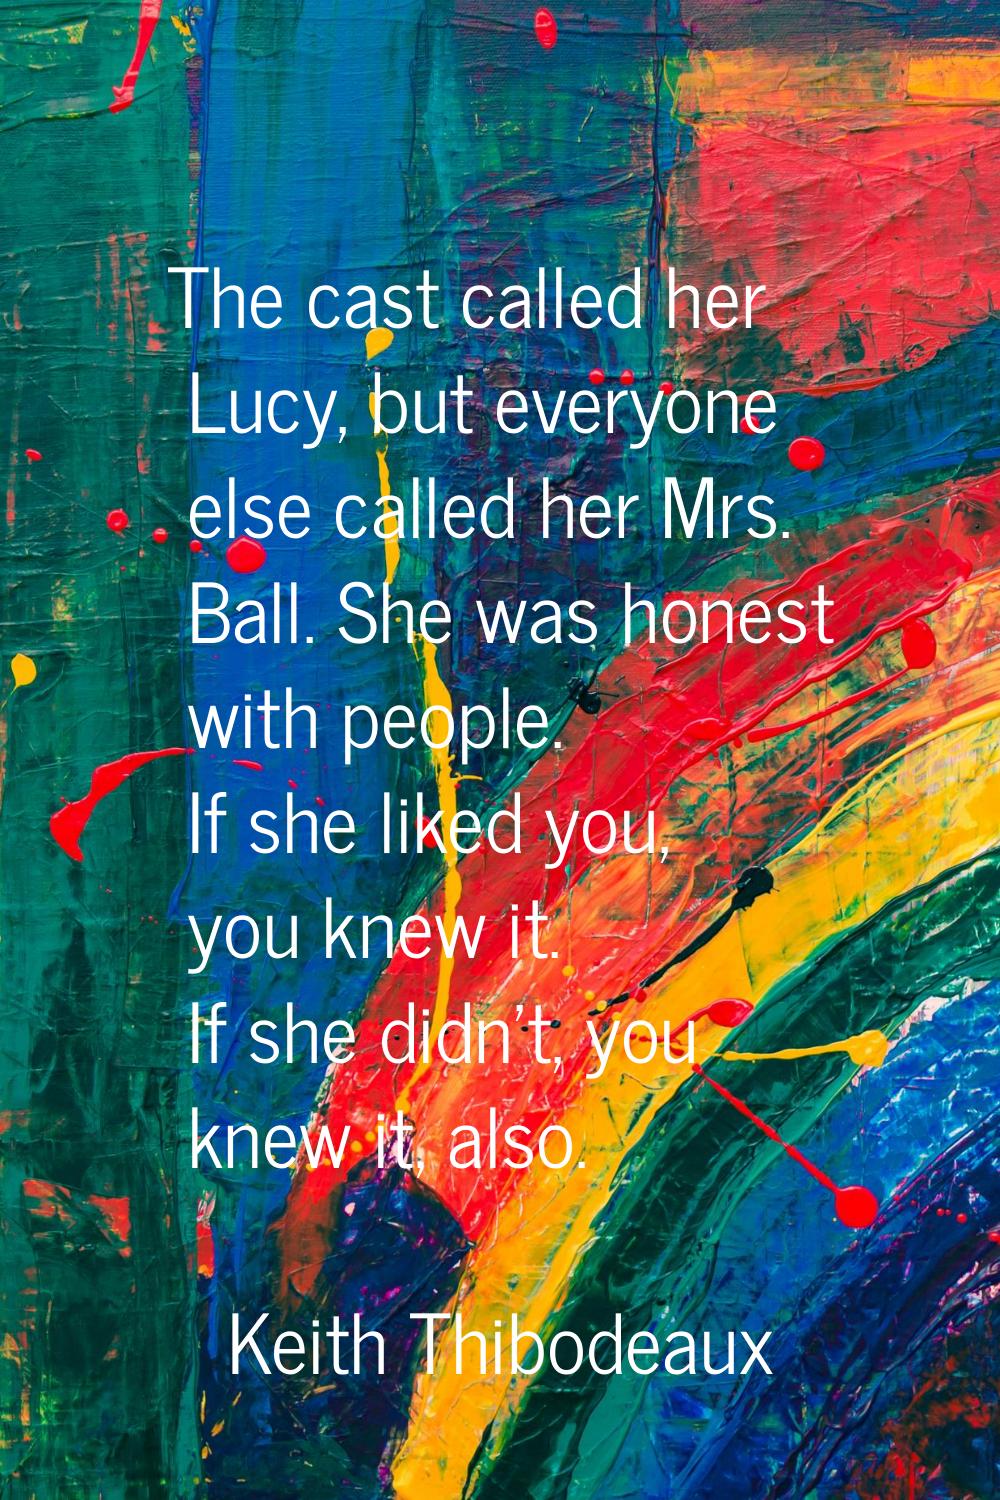 The cast called her Lucy, but everyone else called her Mrs. Ball. She was honest with people. If sh